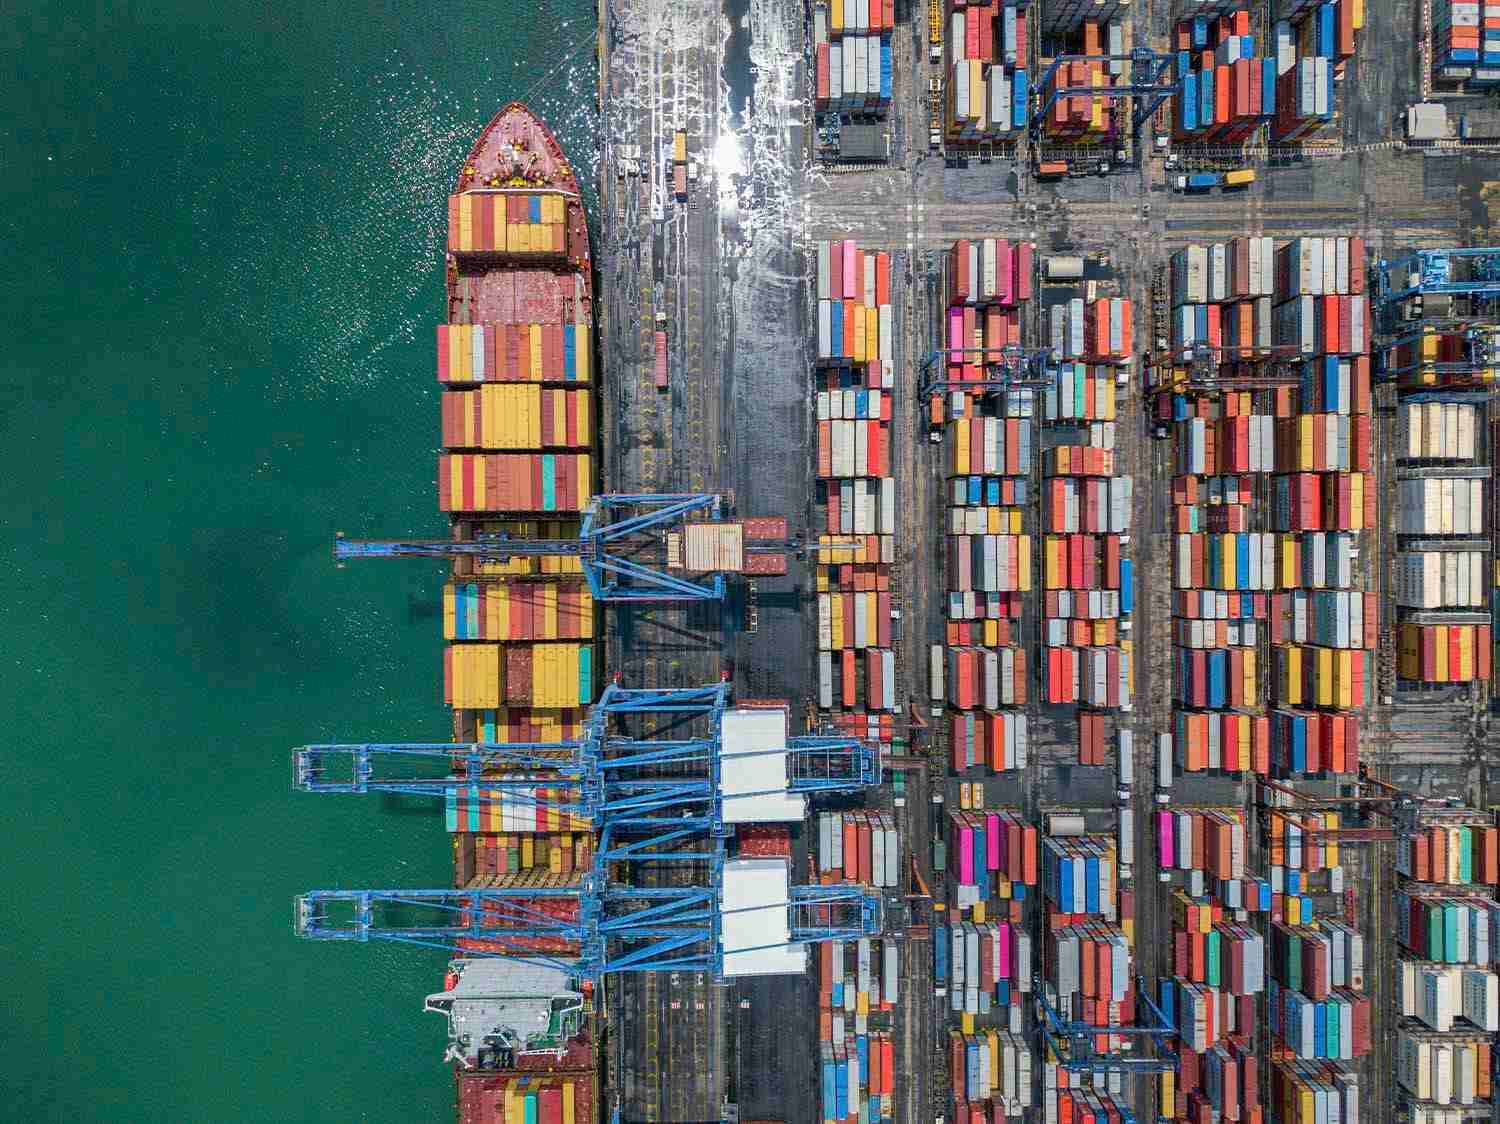 Overhead image of a cargo ship docked at a shipping yard